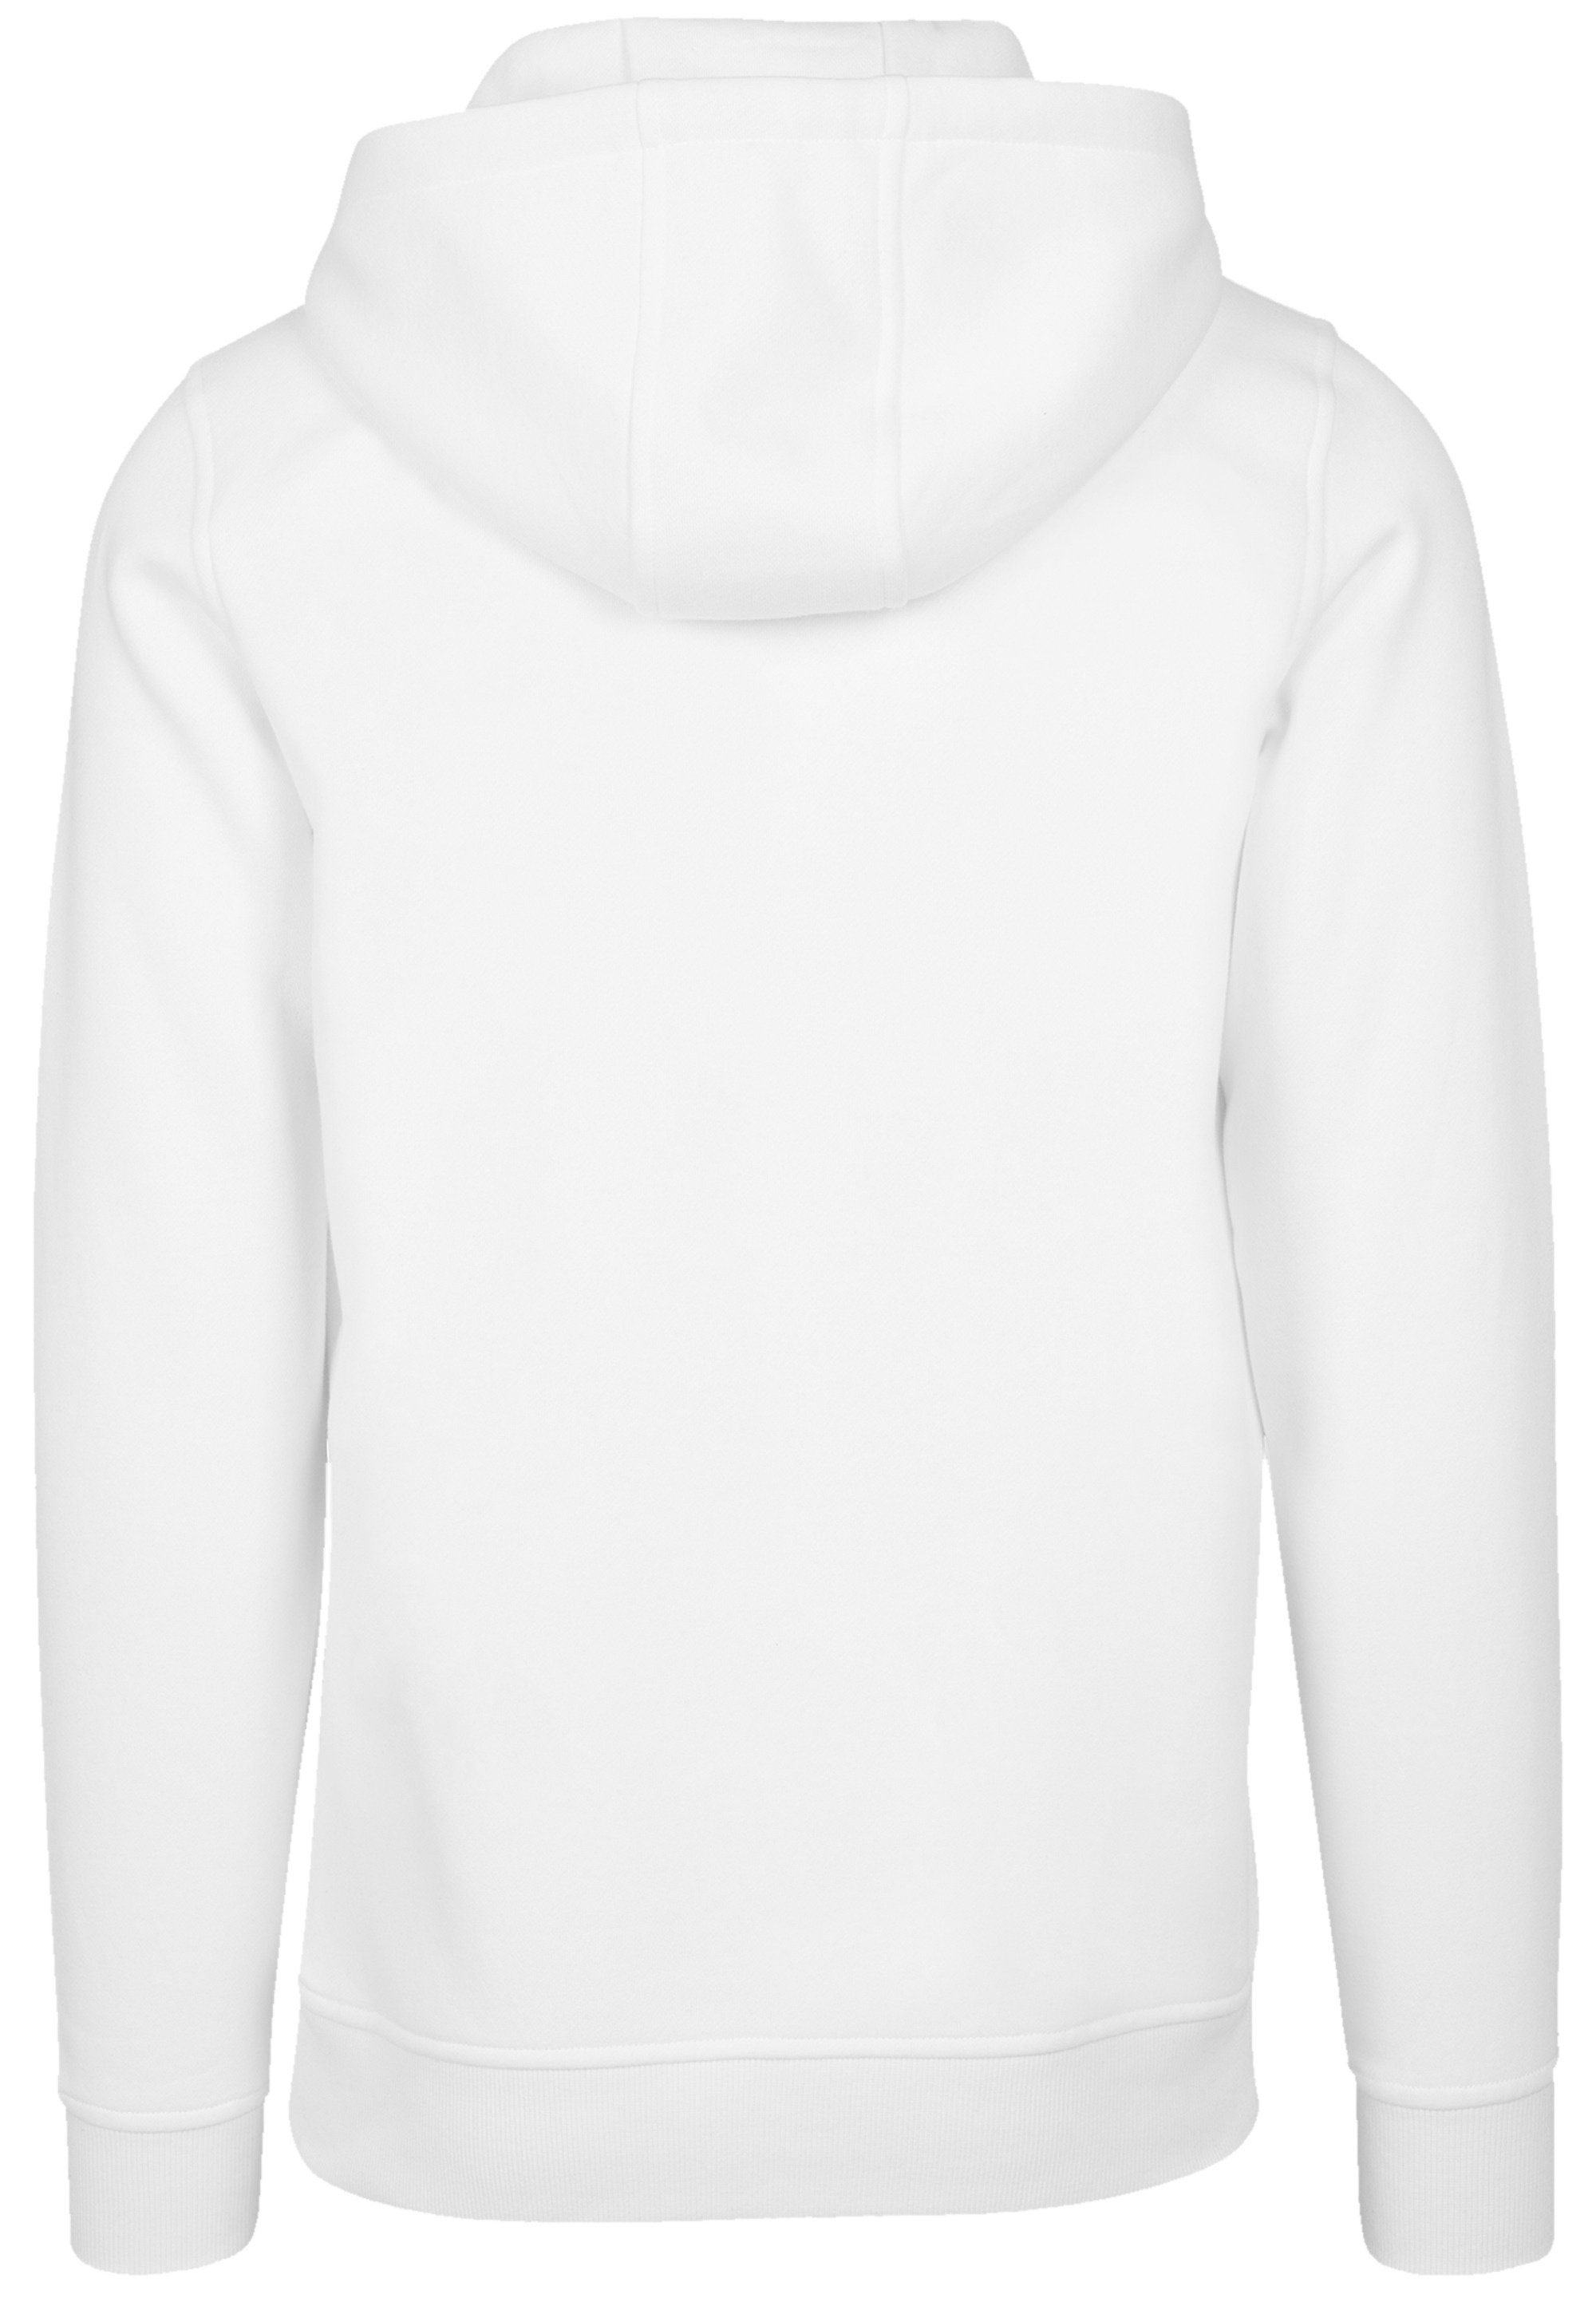 Kapuzenpullover Hoodie, Bequem world the Discover F4NT4STIC weiß Warm,